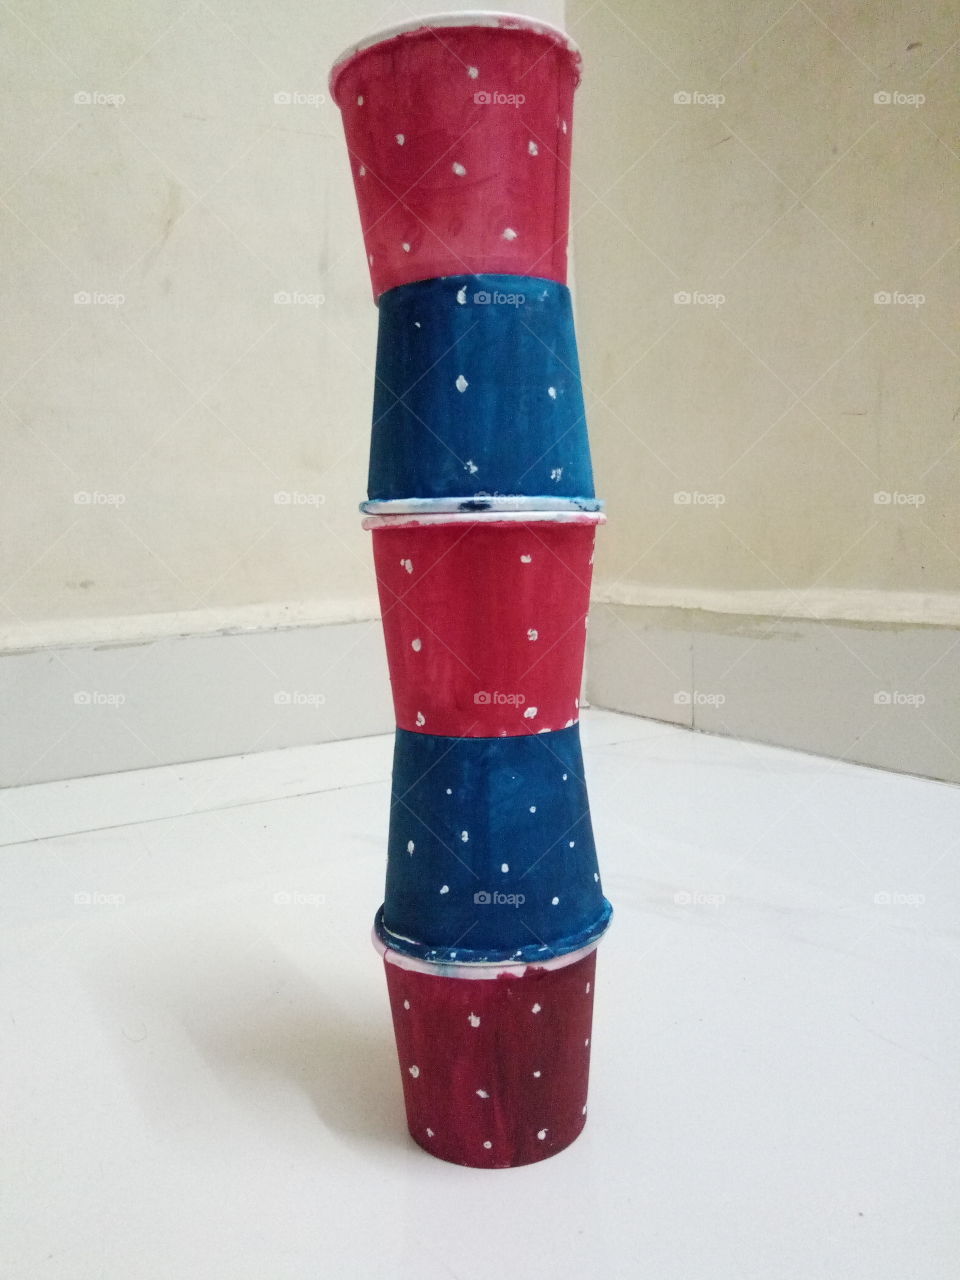 Paper cup tower